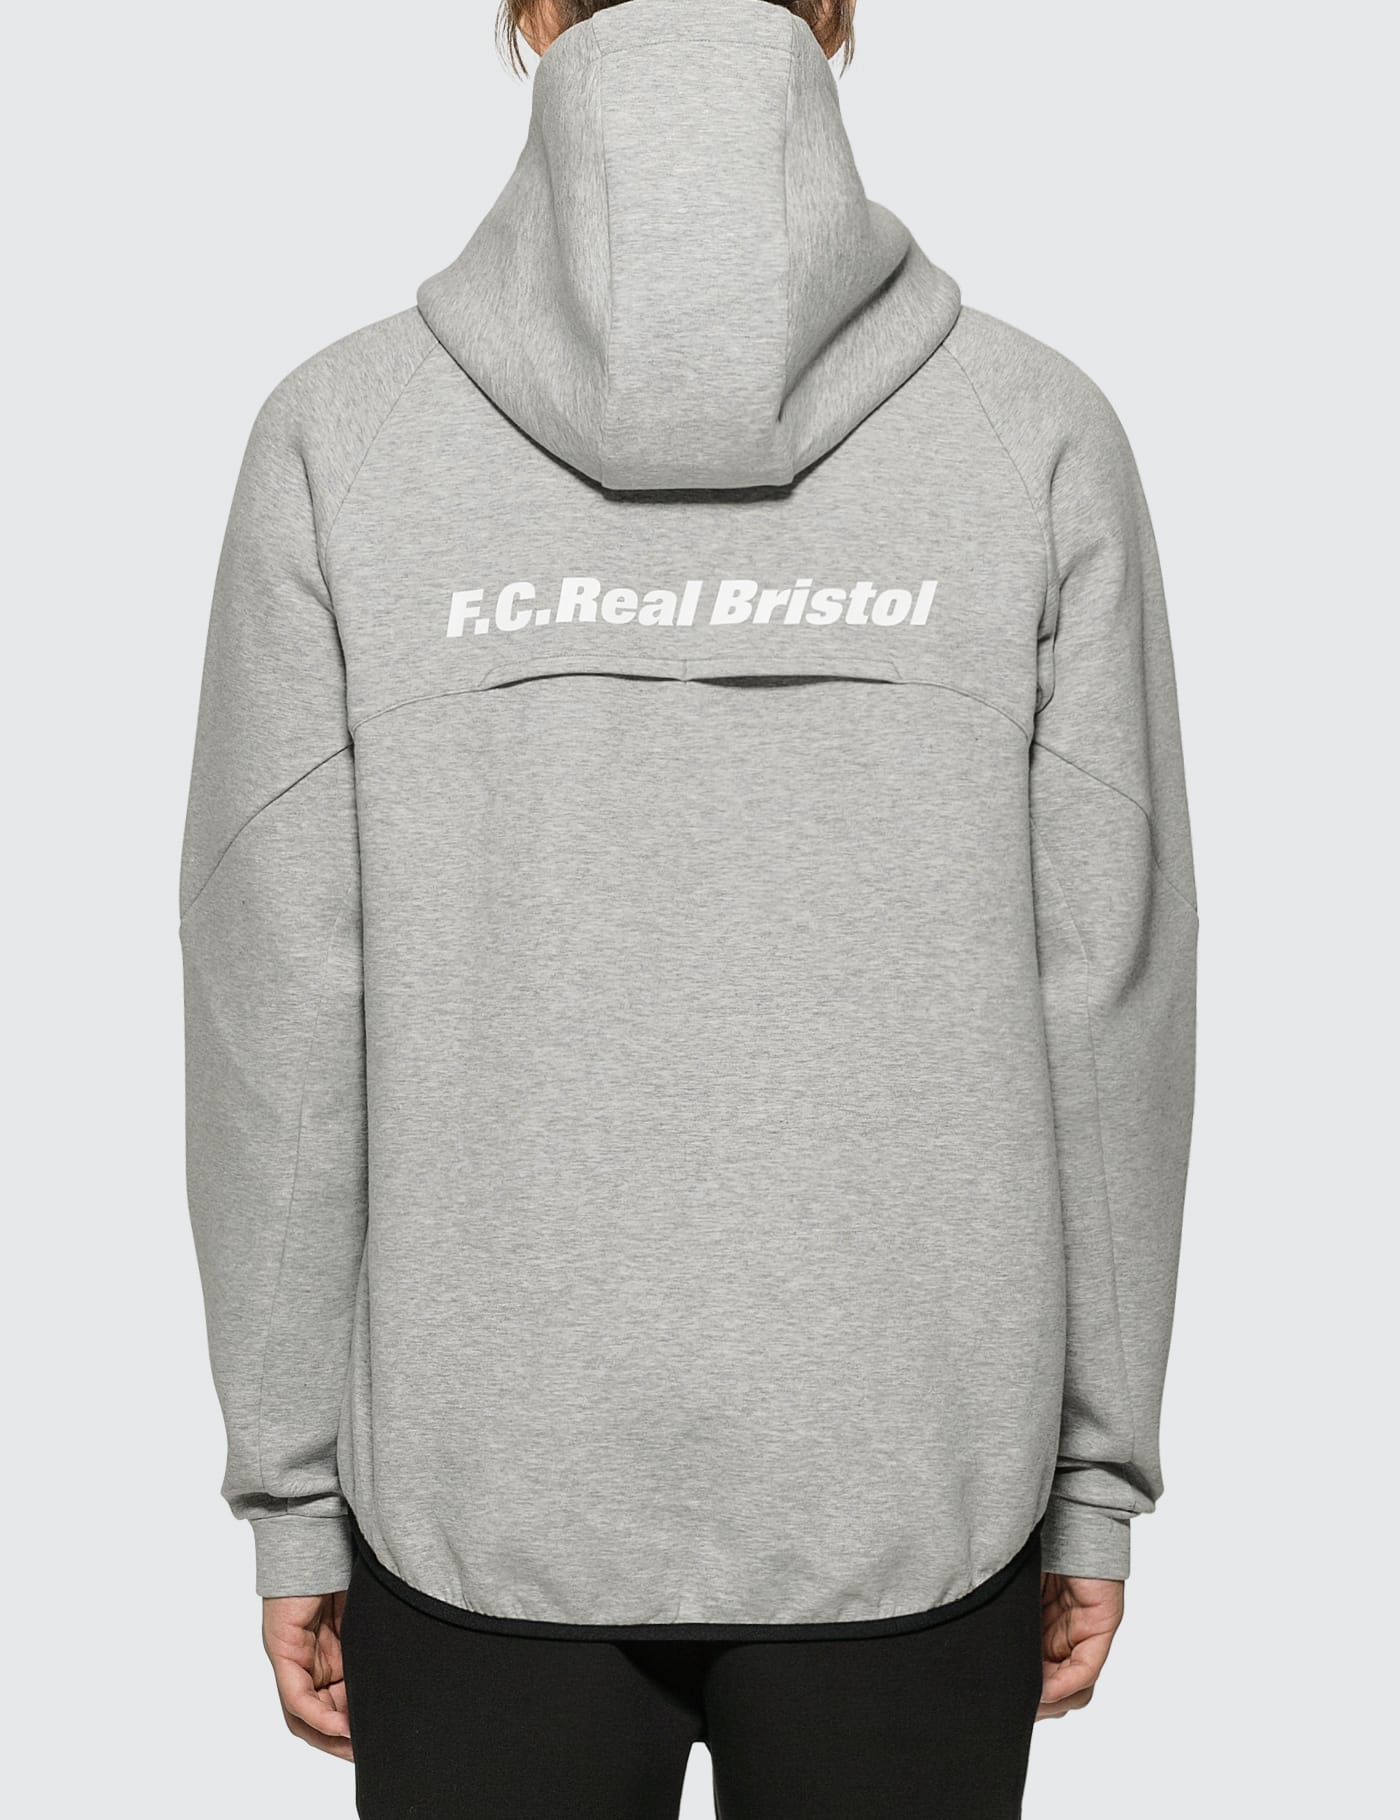 F.C. Real Bristol - Ventilation Hoodie | HBX - Globally Curated